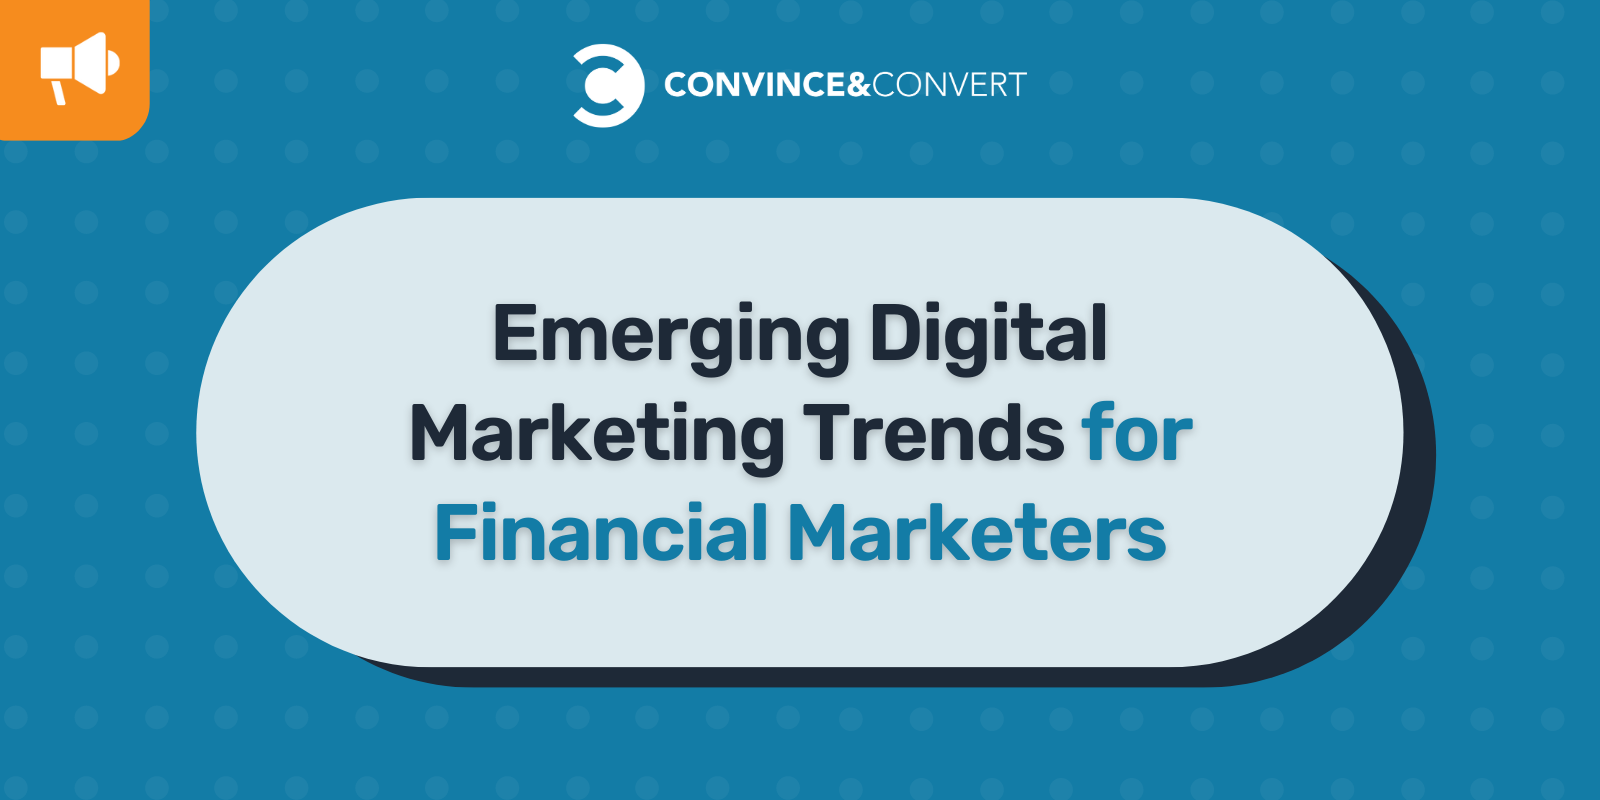 Emerging Digital Marketing Trends for Financial Marketers